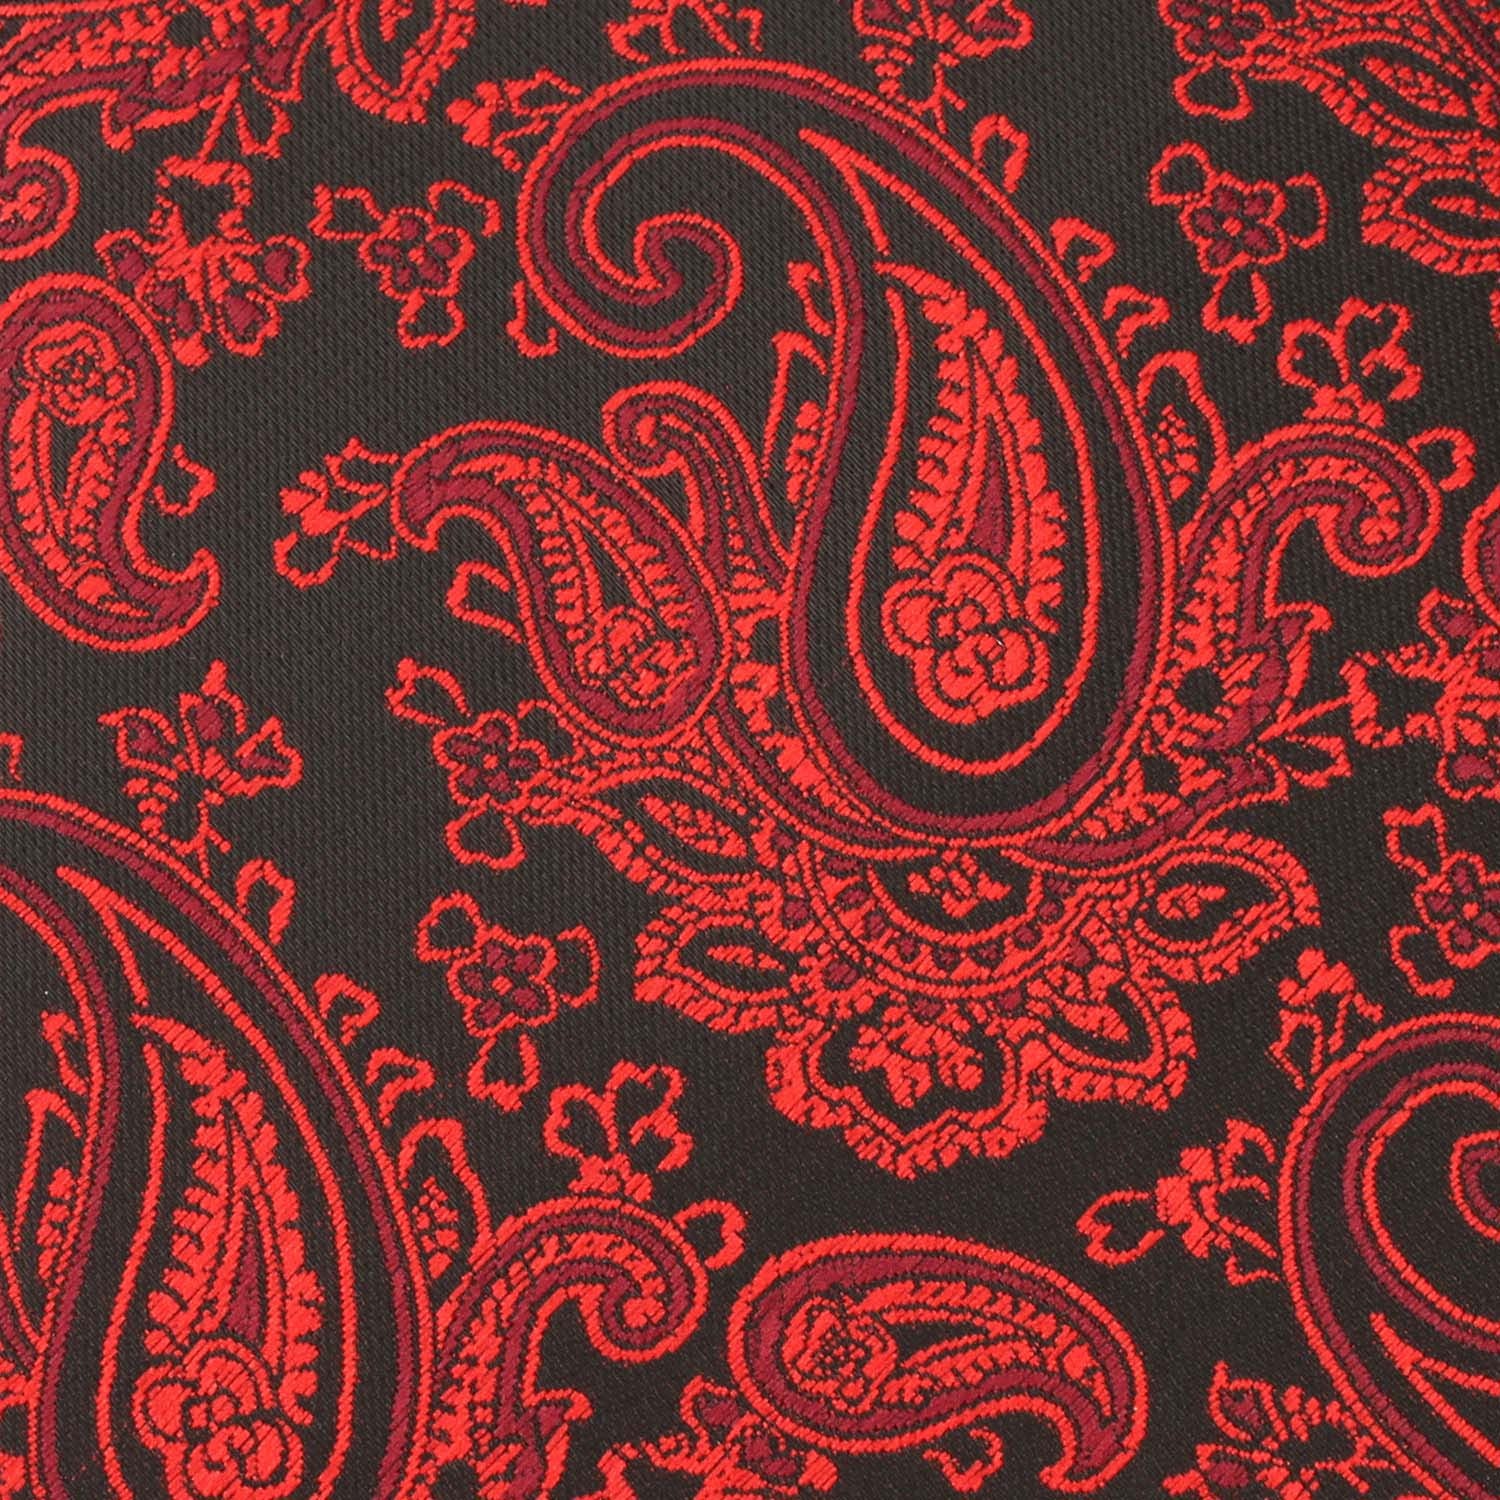 Paisley Red and Black Fabric Pocket Square X718